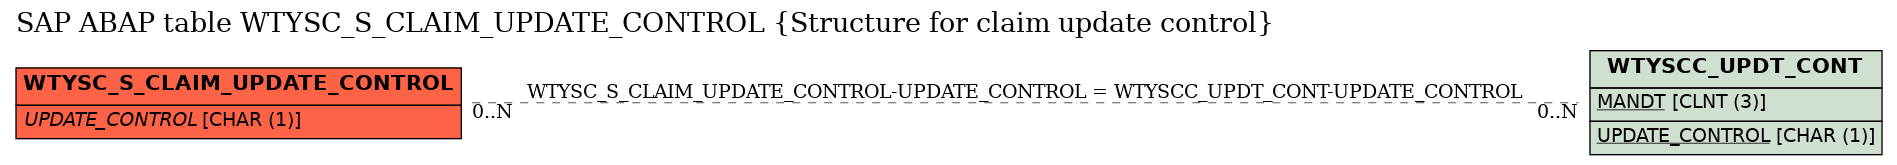 E-R Diagram for table WTYSC_S_CLAIM_UPDATE_CONTROL (Structure for claim update control)